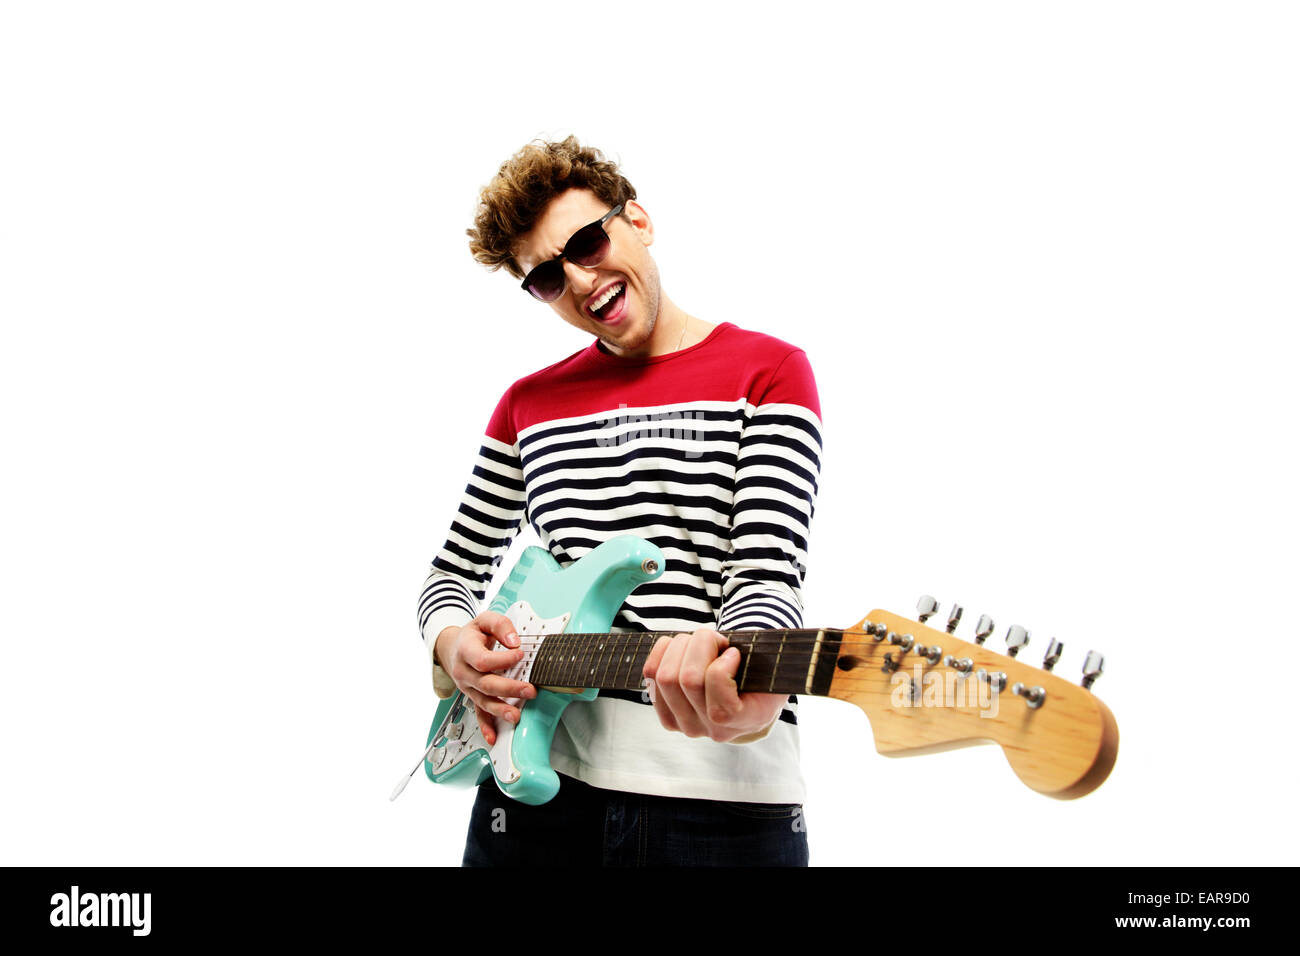 Funny fashion man playing on the guitar on a white background Stock Photo